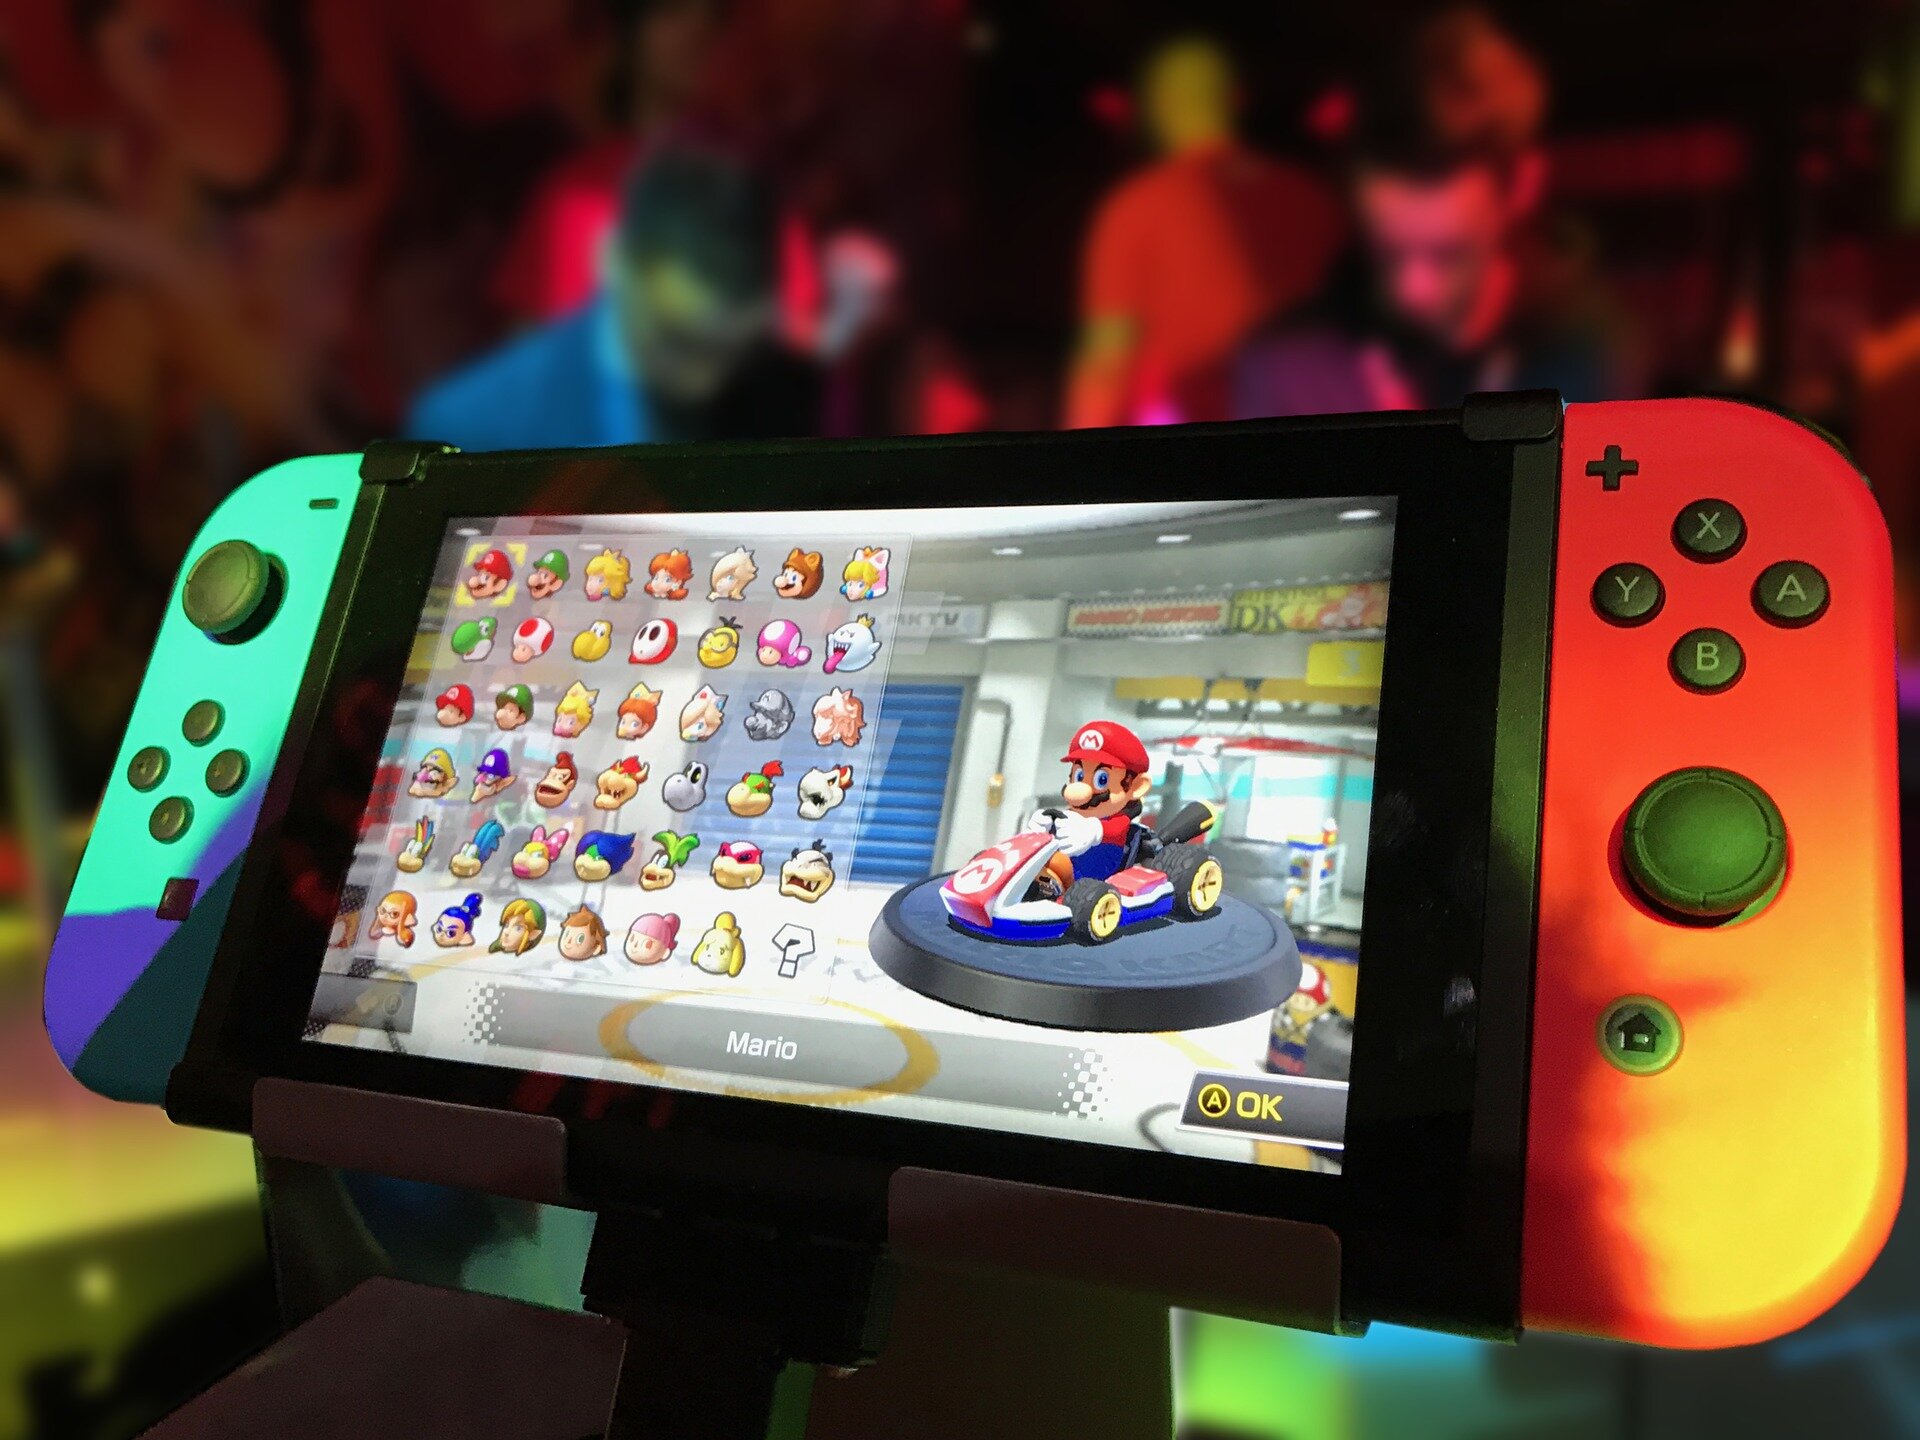 The next 'Mario Kart' game for Nintendo Switch turns your living space